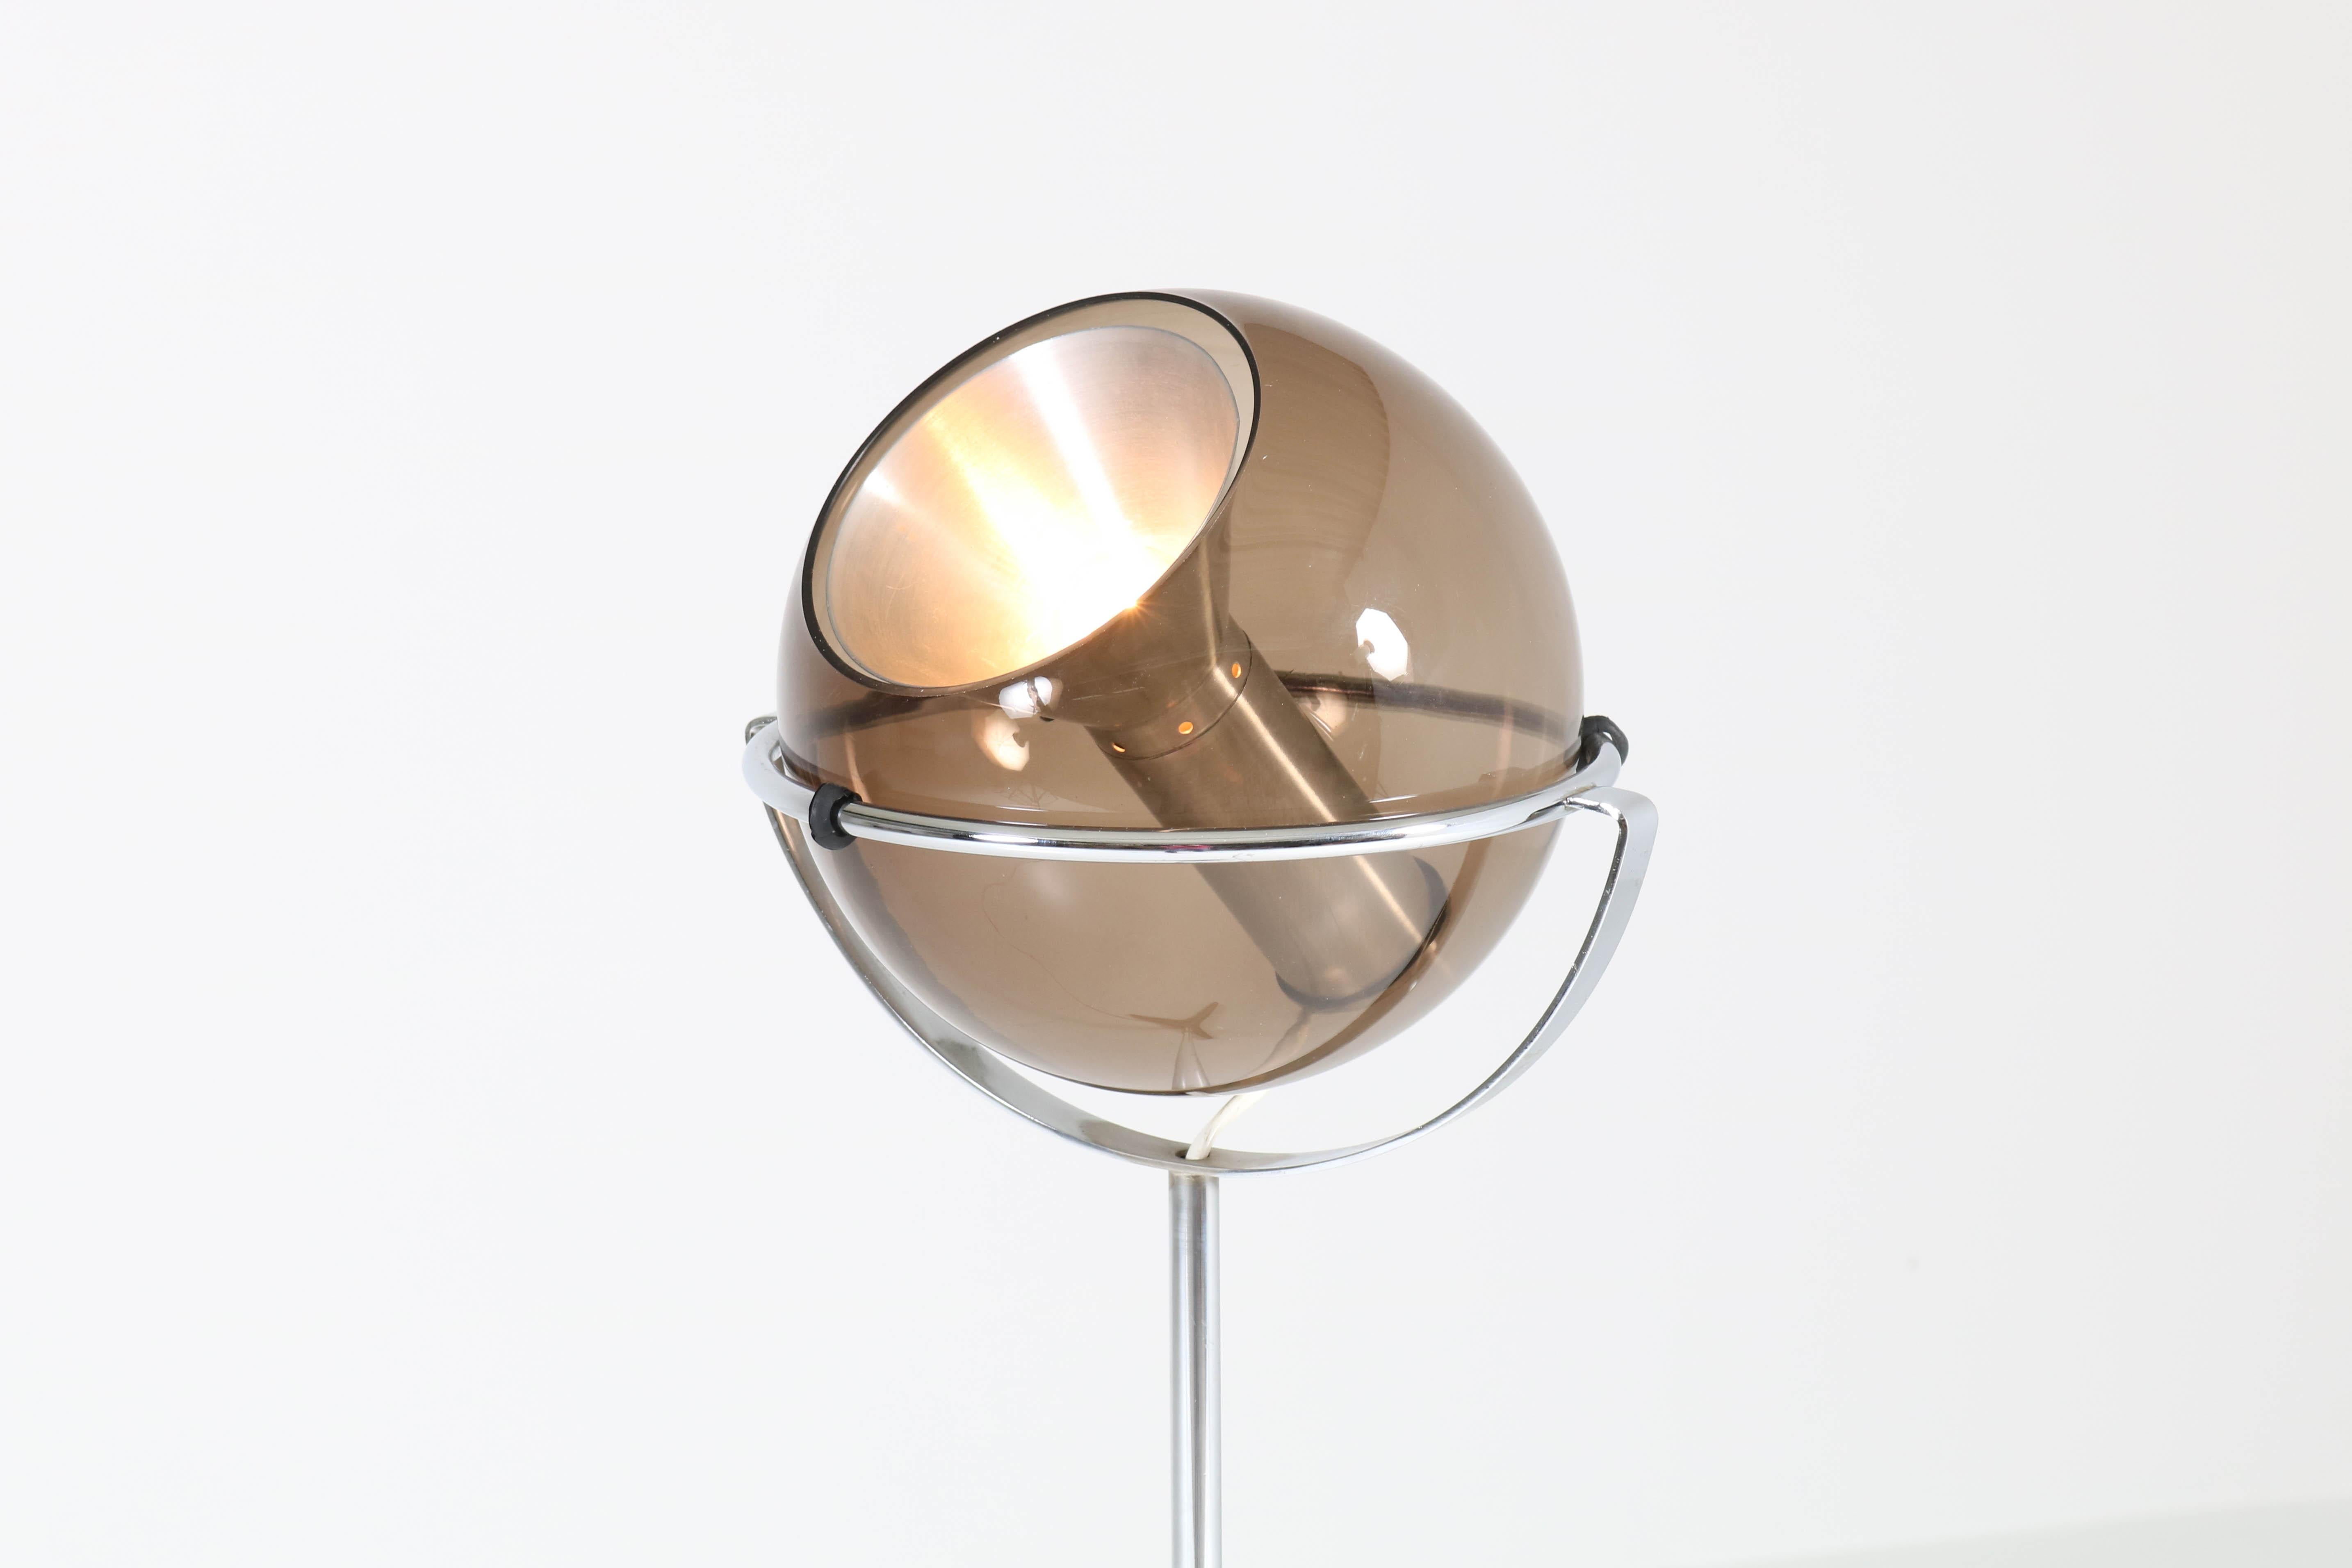 Stunning Mid-Century Modern floor lamp.
Design by Frank Ligtelijn for RAAK Amsterdam.
Striking Dutch design from the 1960s.
Original adjustable in various positions spherical smoked glass shade on chrome stem which is adjustable in height.
In